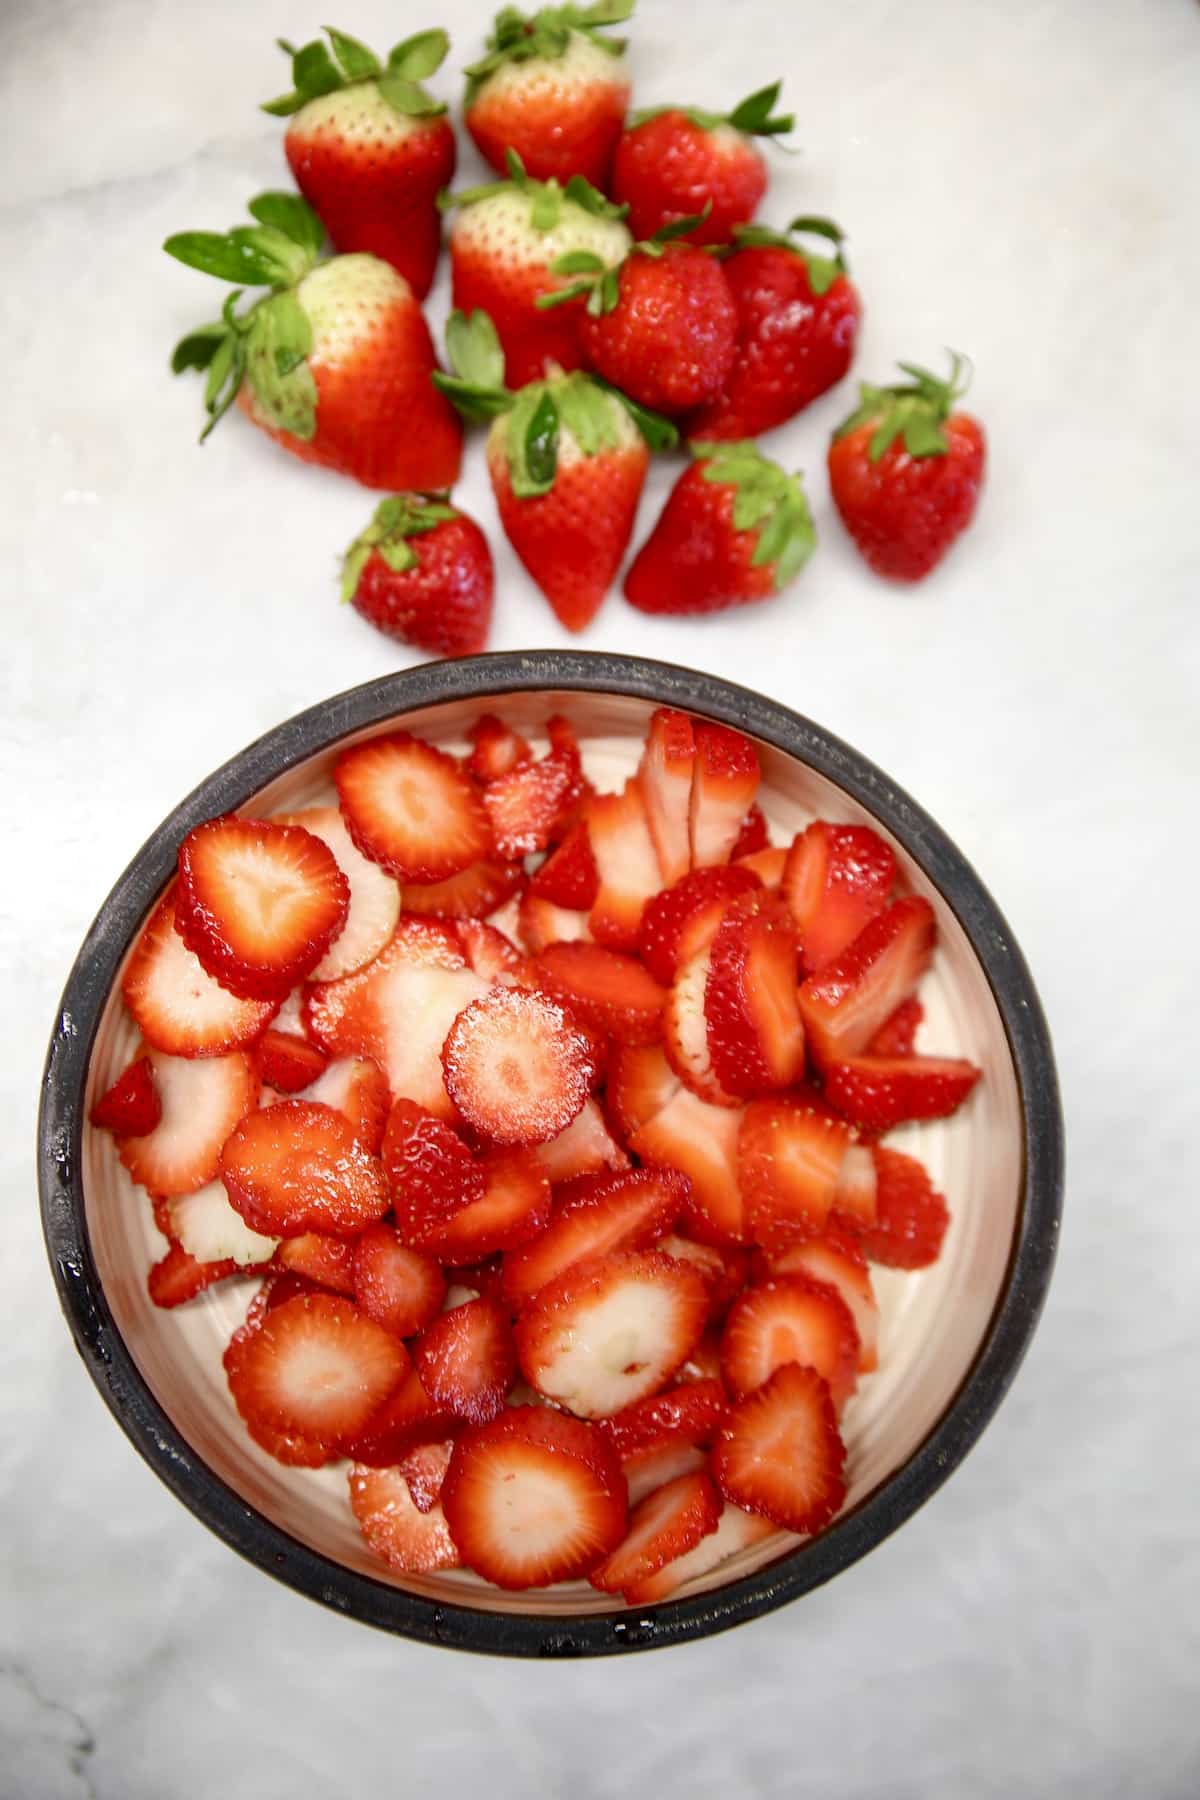 Sliced strawberries in a bowl, whole strawberries next to the bowl.